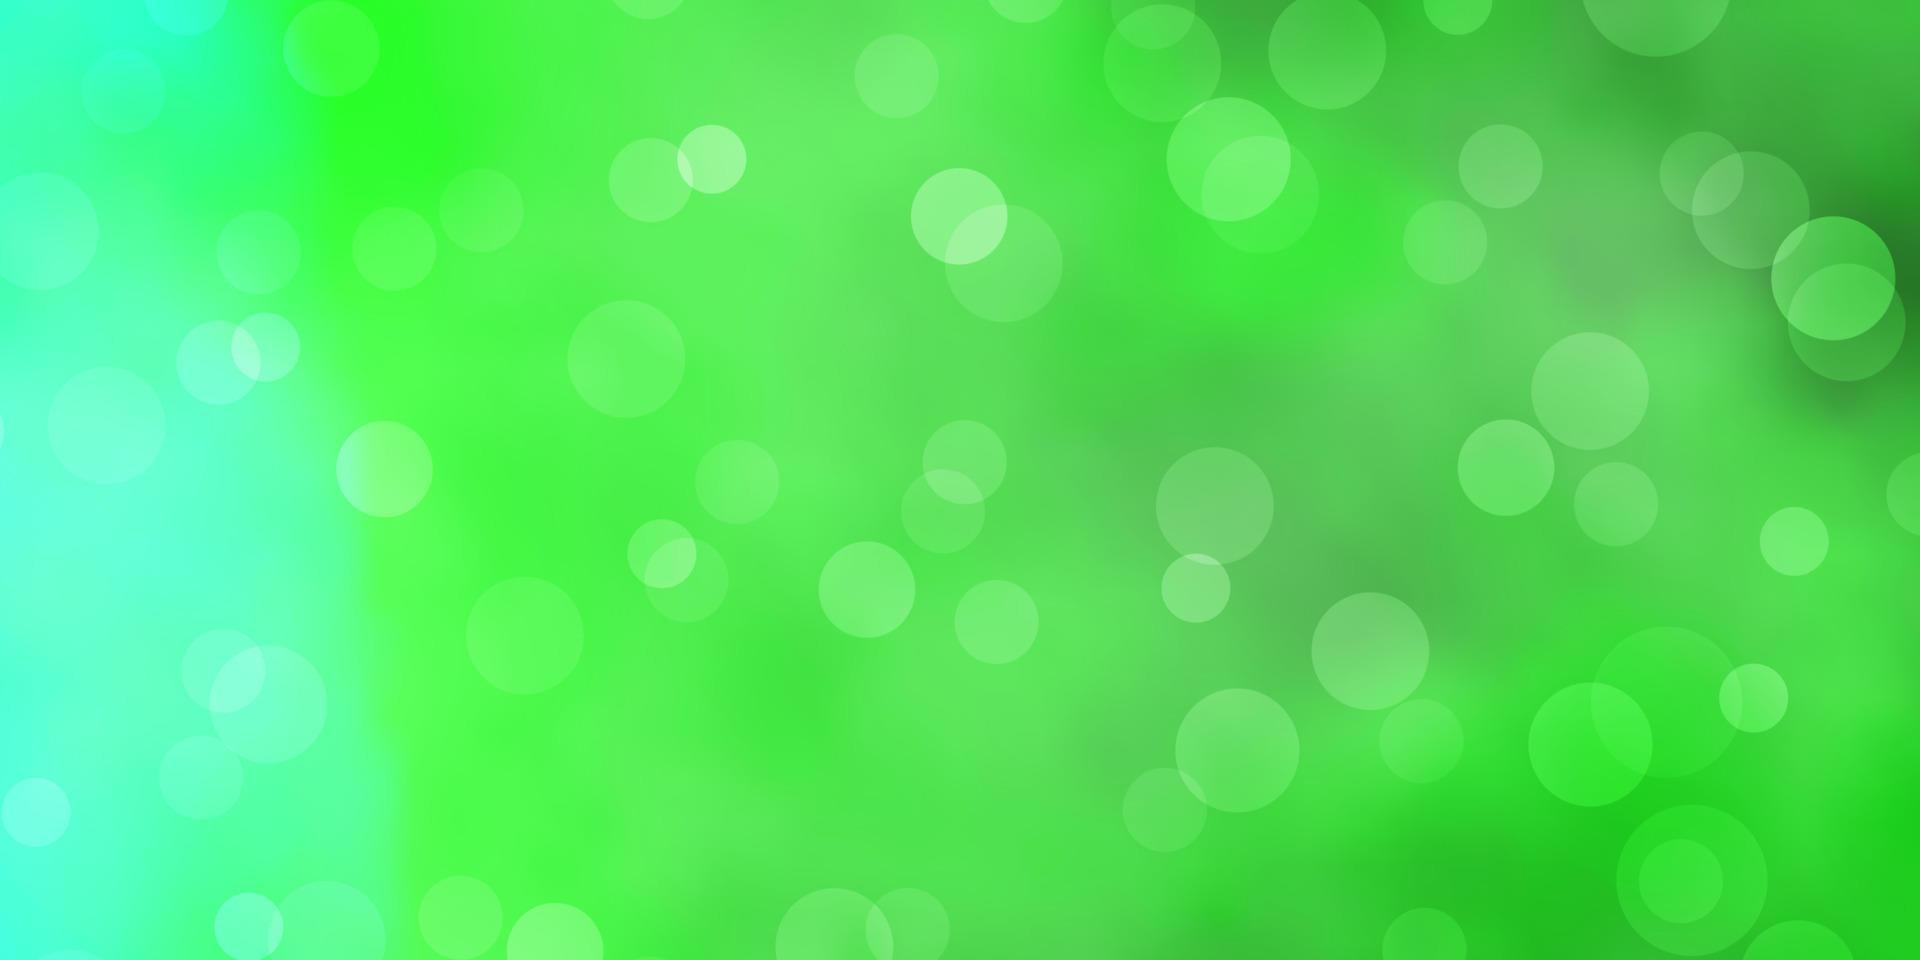 Light Green vector background with circles.